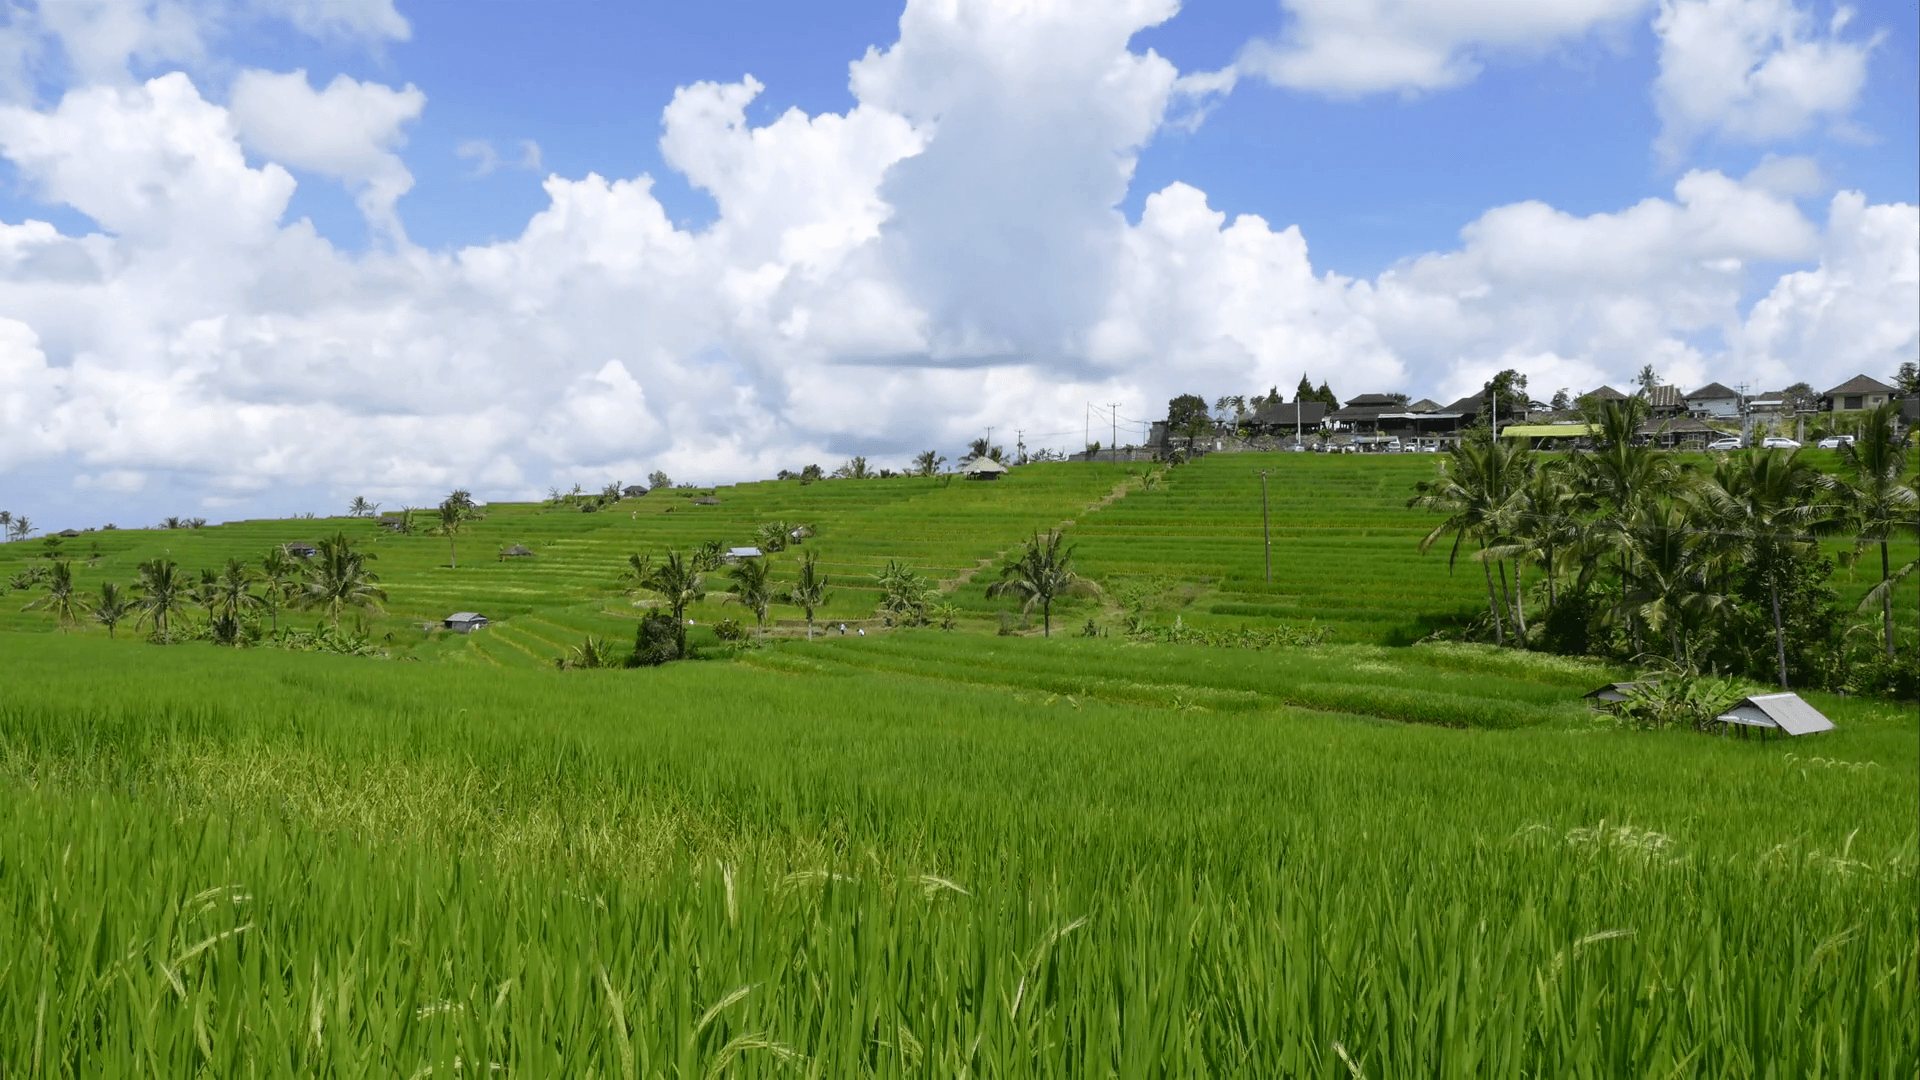 Rice field paddy landscape in Bali Indonesia. Asia farm agriculture